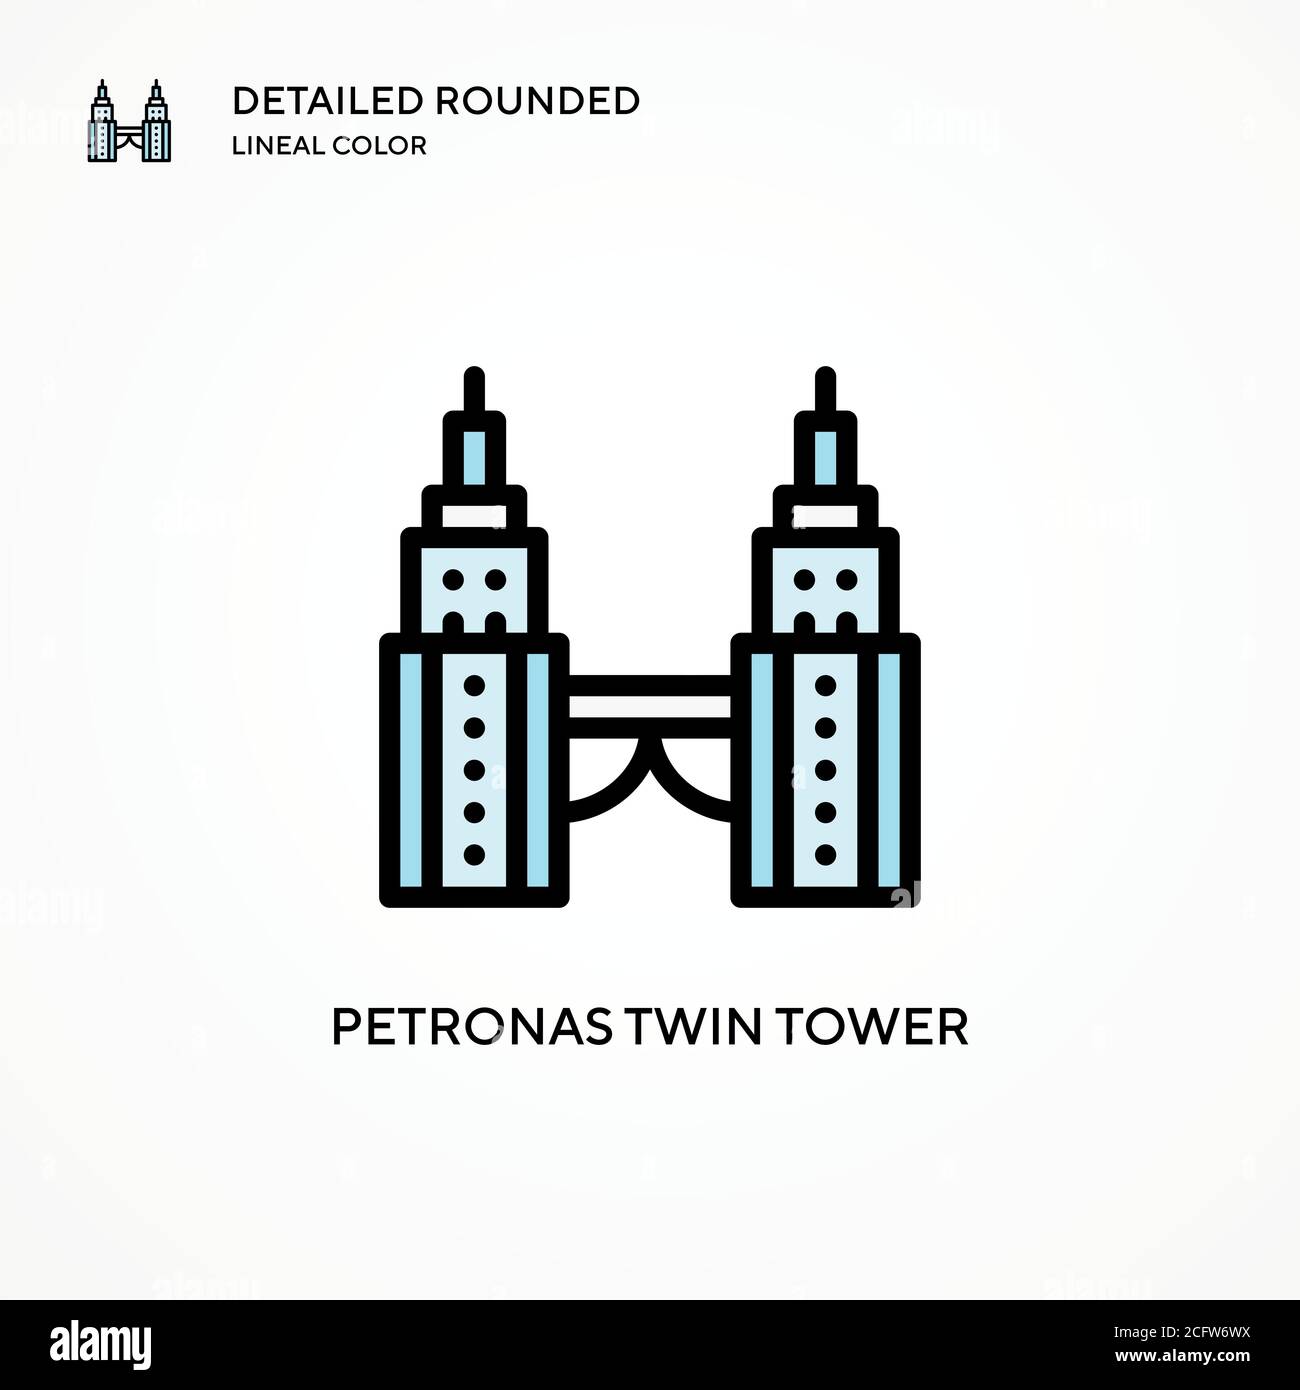 Petronas twin tower vector icon. Modern vector illustration concepts. Easy to edit and customize. Stock Vector